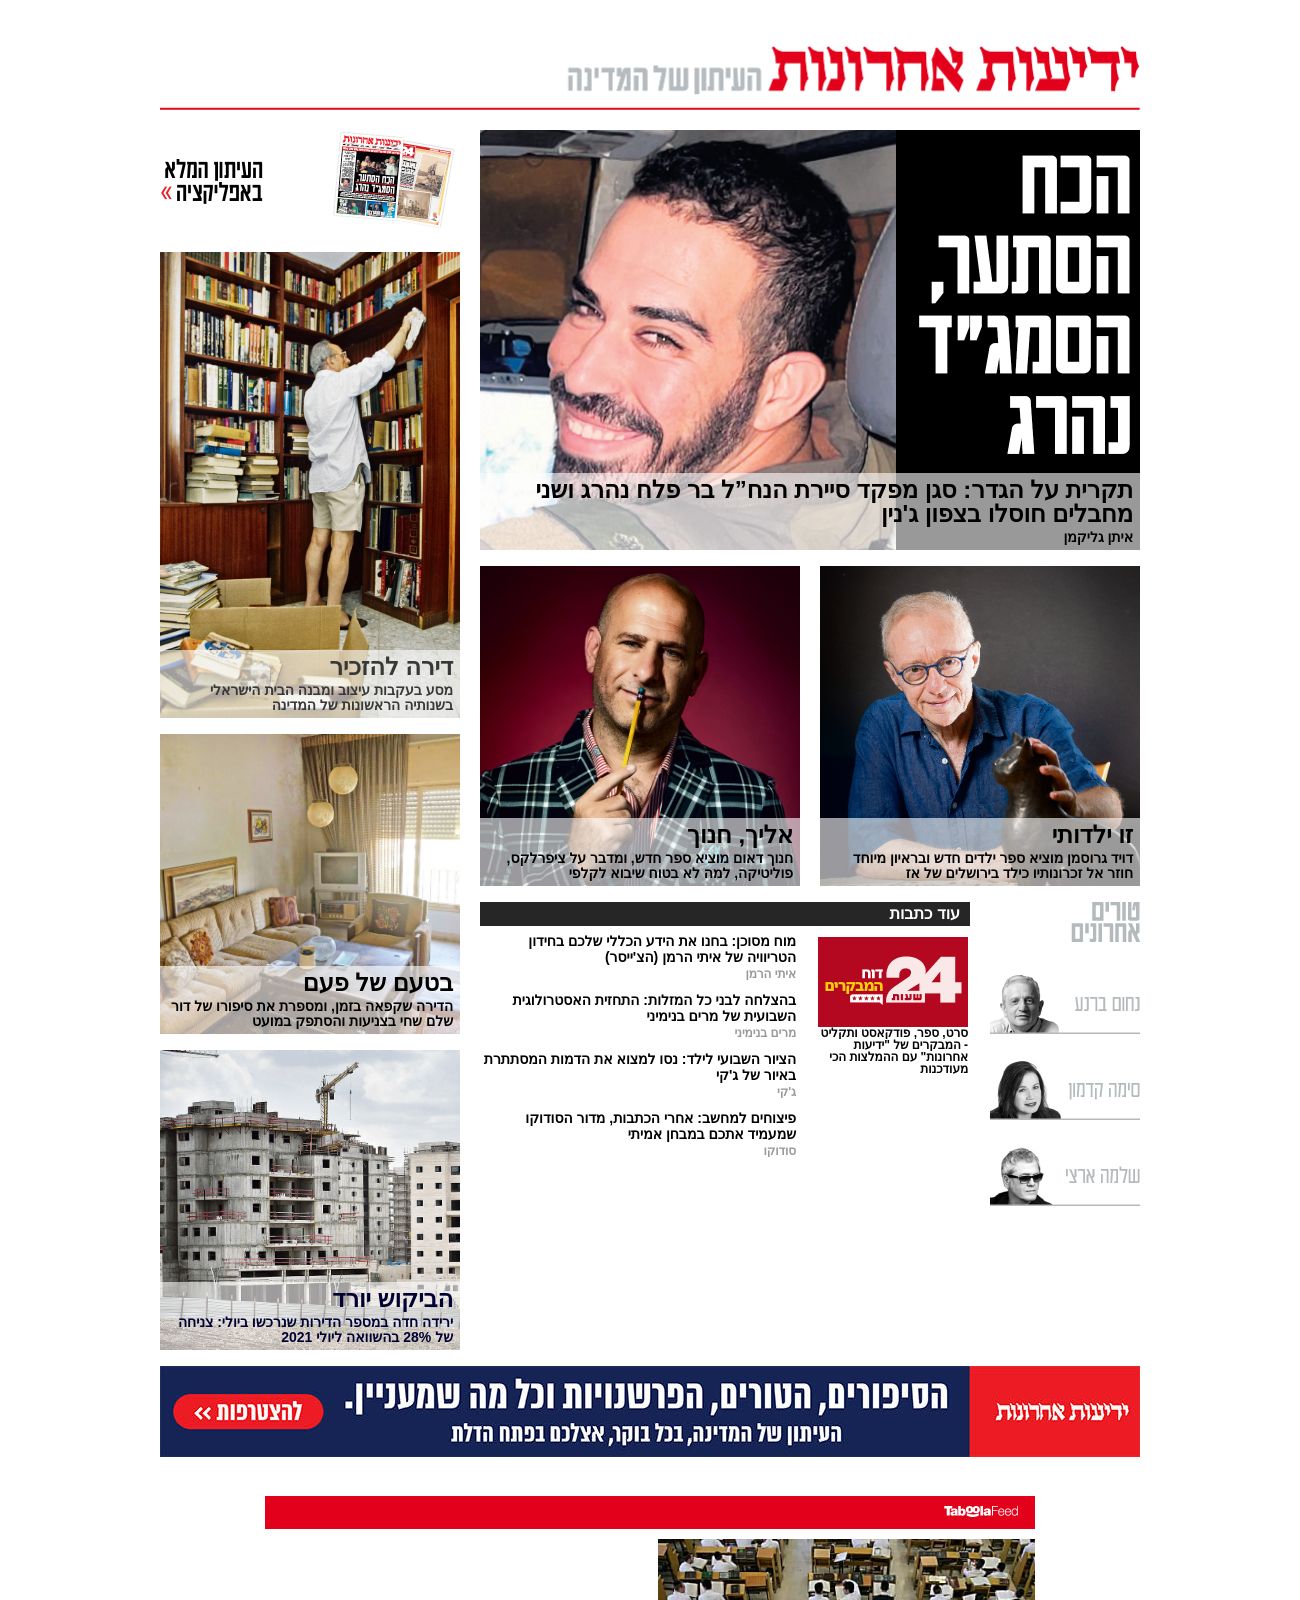 Yedioth Ahronoth at 2022-09-15 17:17:02+03:00 local time